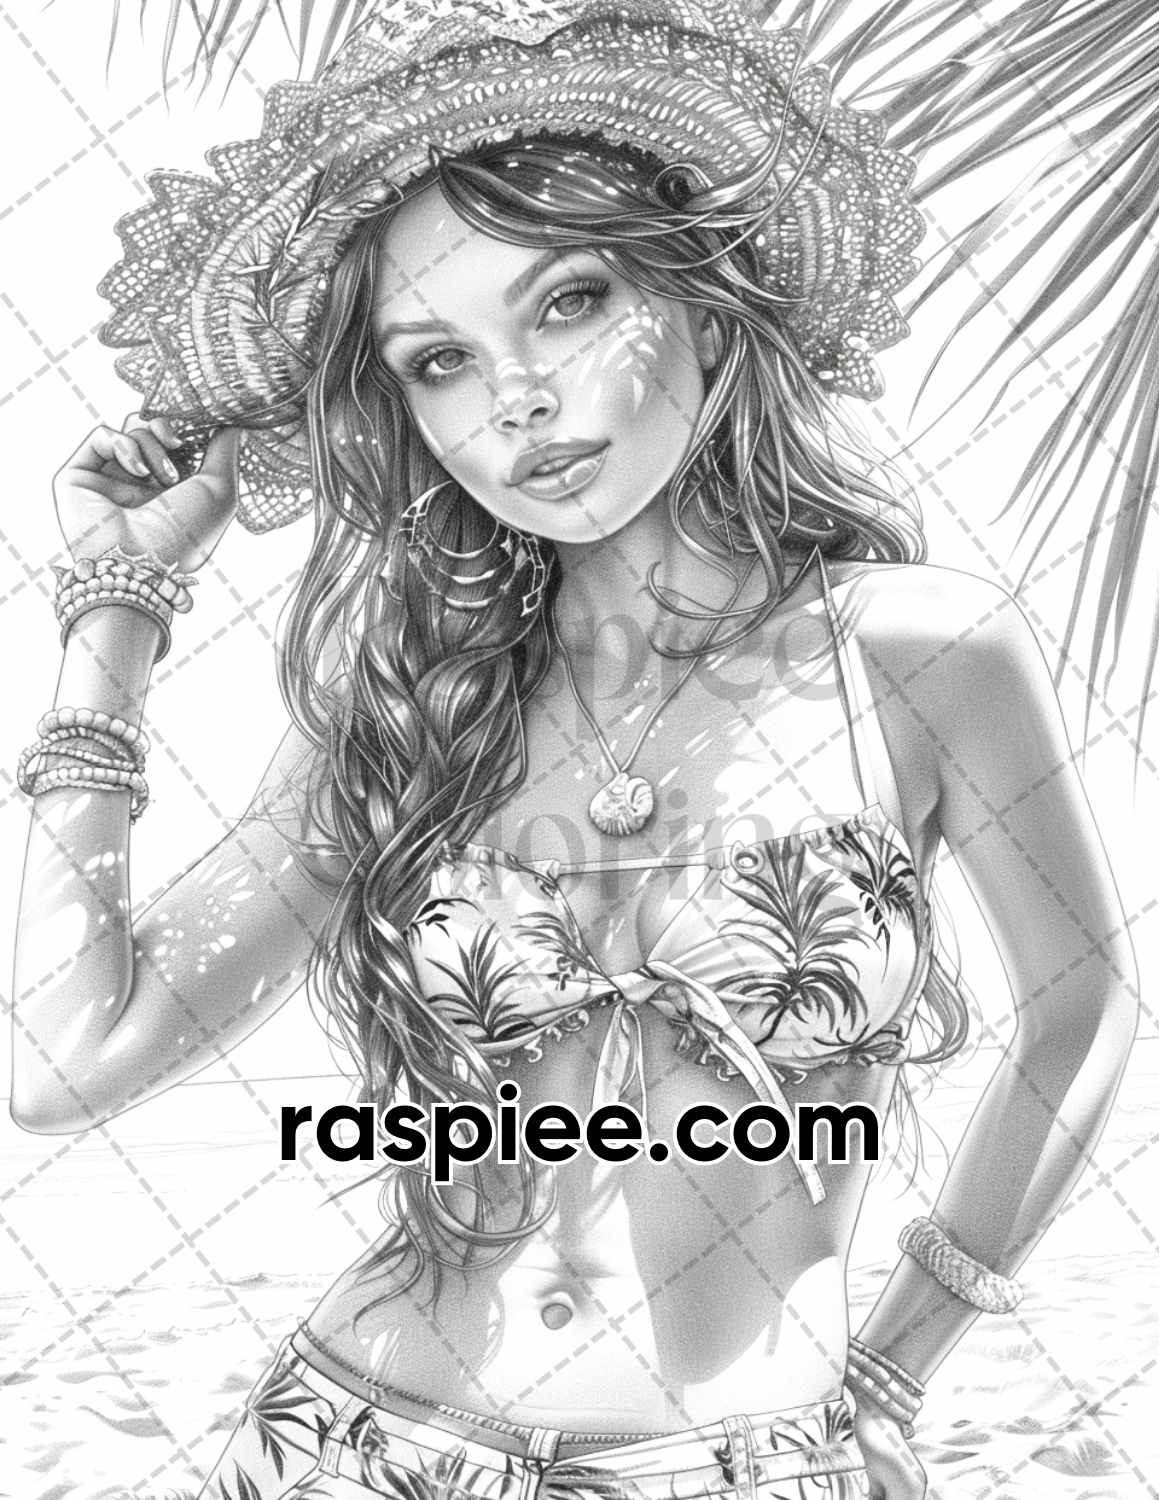 adult coloring pages, adult coloring sheets, adult coloring book pdf, adult coloring book printable, grayscale coloring pages, grayscale coloring books, grayscale illustration, portrait adult coloring pages, portrait adult coloring book, Beautiful Tropical Girls Grayscale Adult Coloring Pages